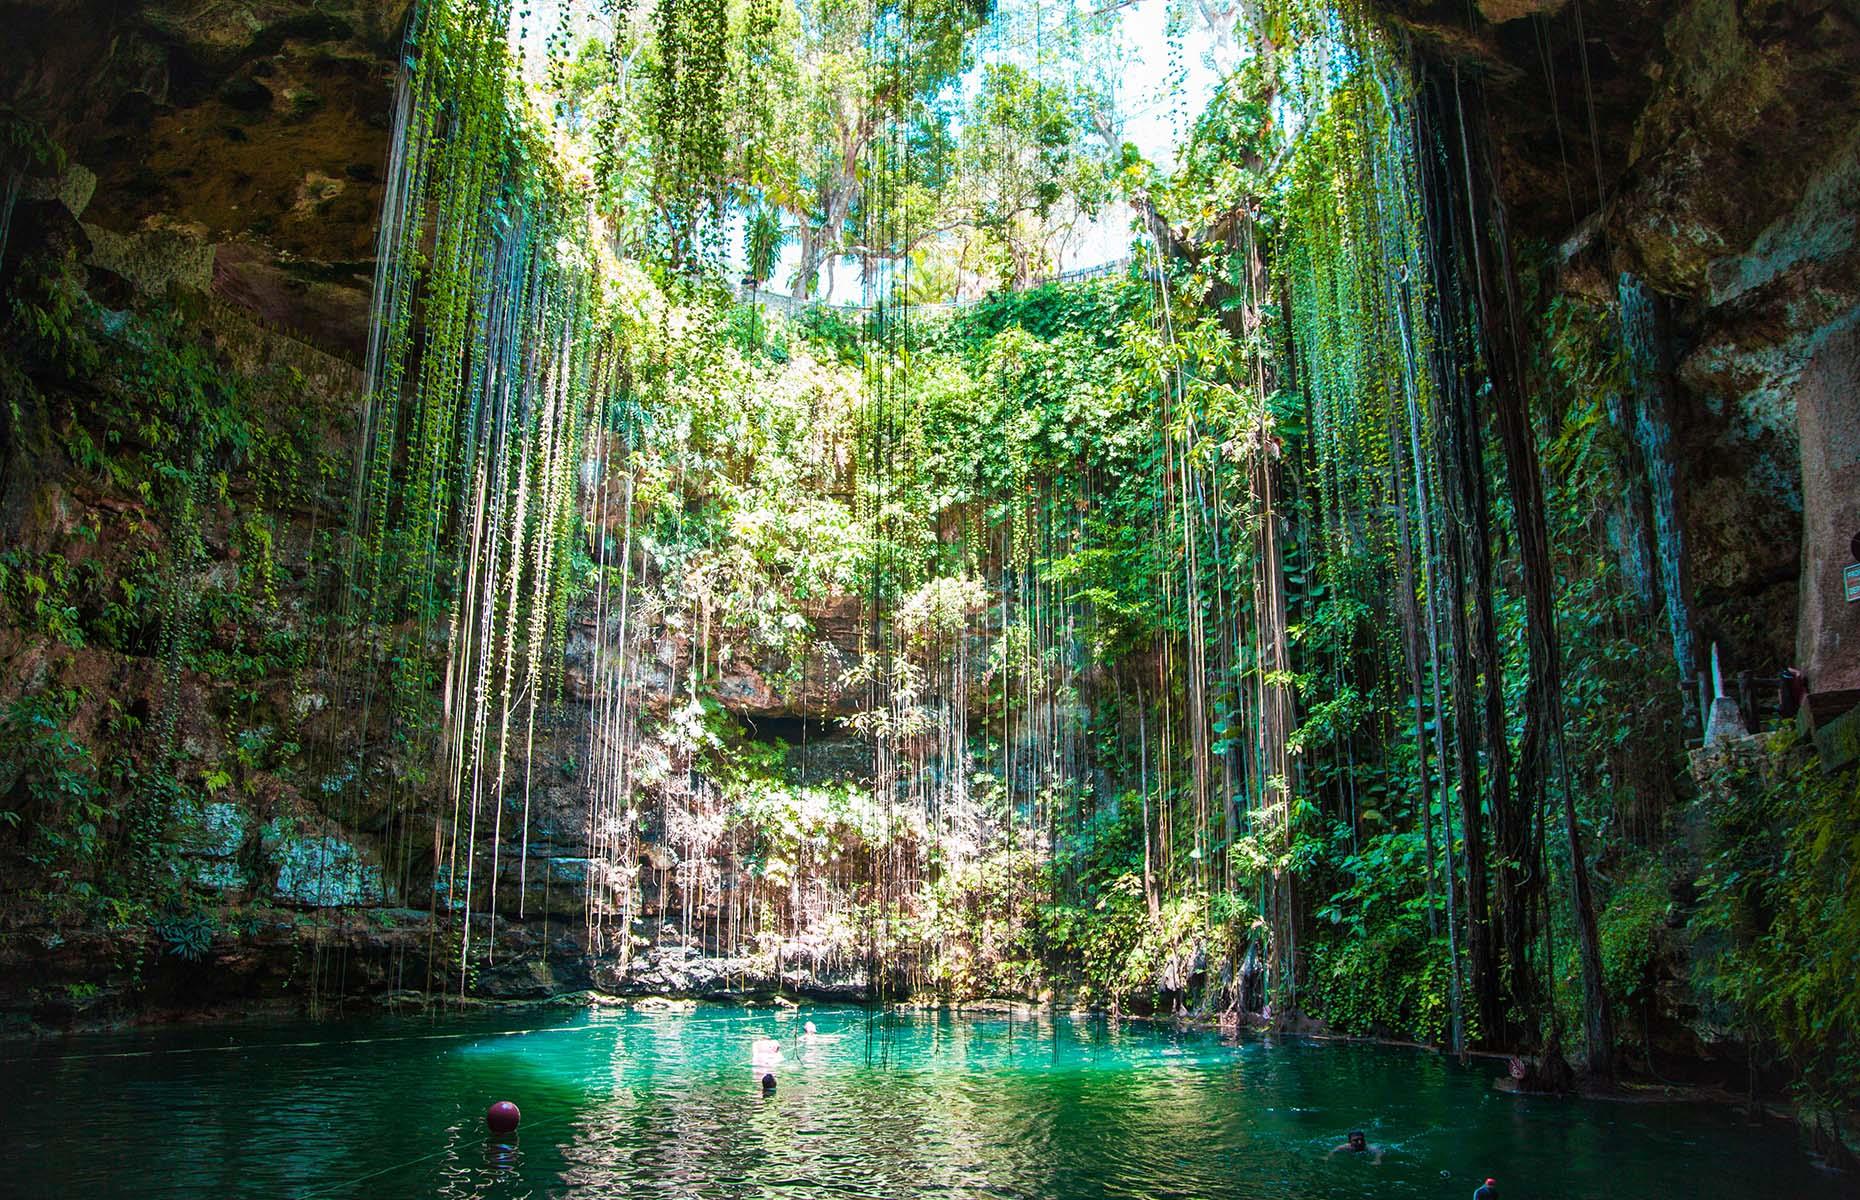 Ik Kil, a natural cenote (or sinkhole) in Yucatán, Mexico, was formed during heavy tropical rainfall which made its original limestone ceiling collapse. It's a picturesque natural attraction that really looks like it could be a passageway into a lost world. The spot is considered sacred by the Mayan people and a swim in the pool's mesmerizing green waters is truly magical.